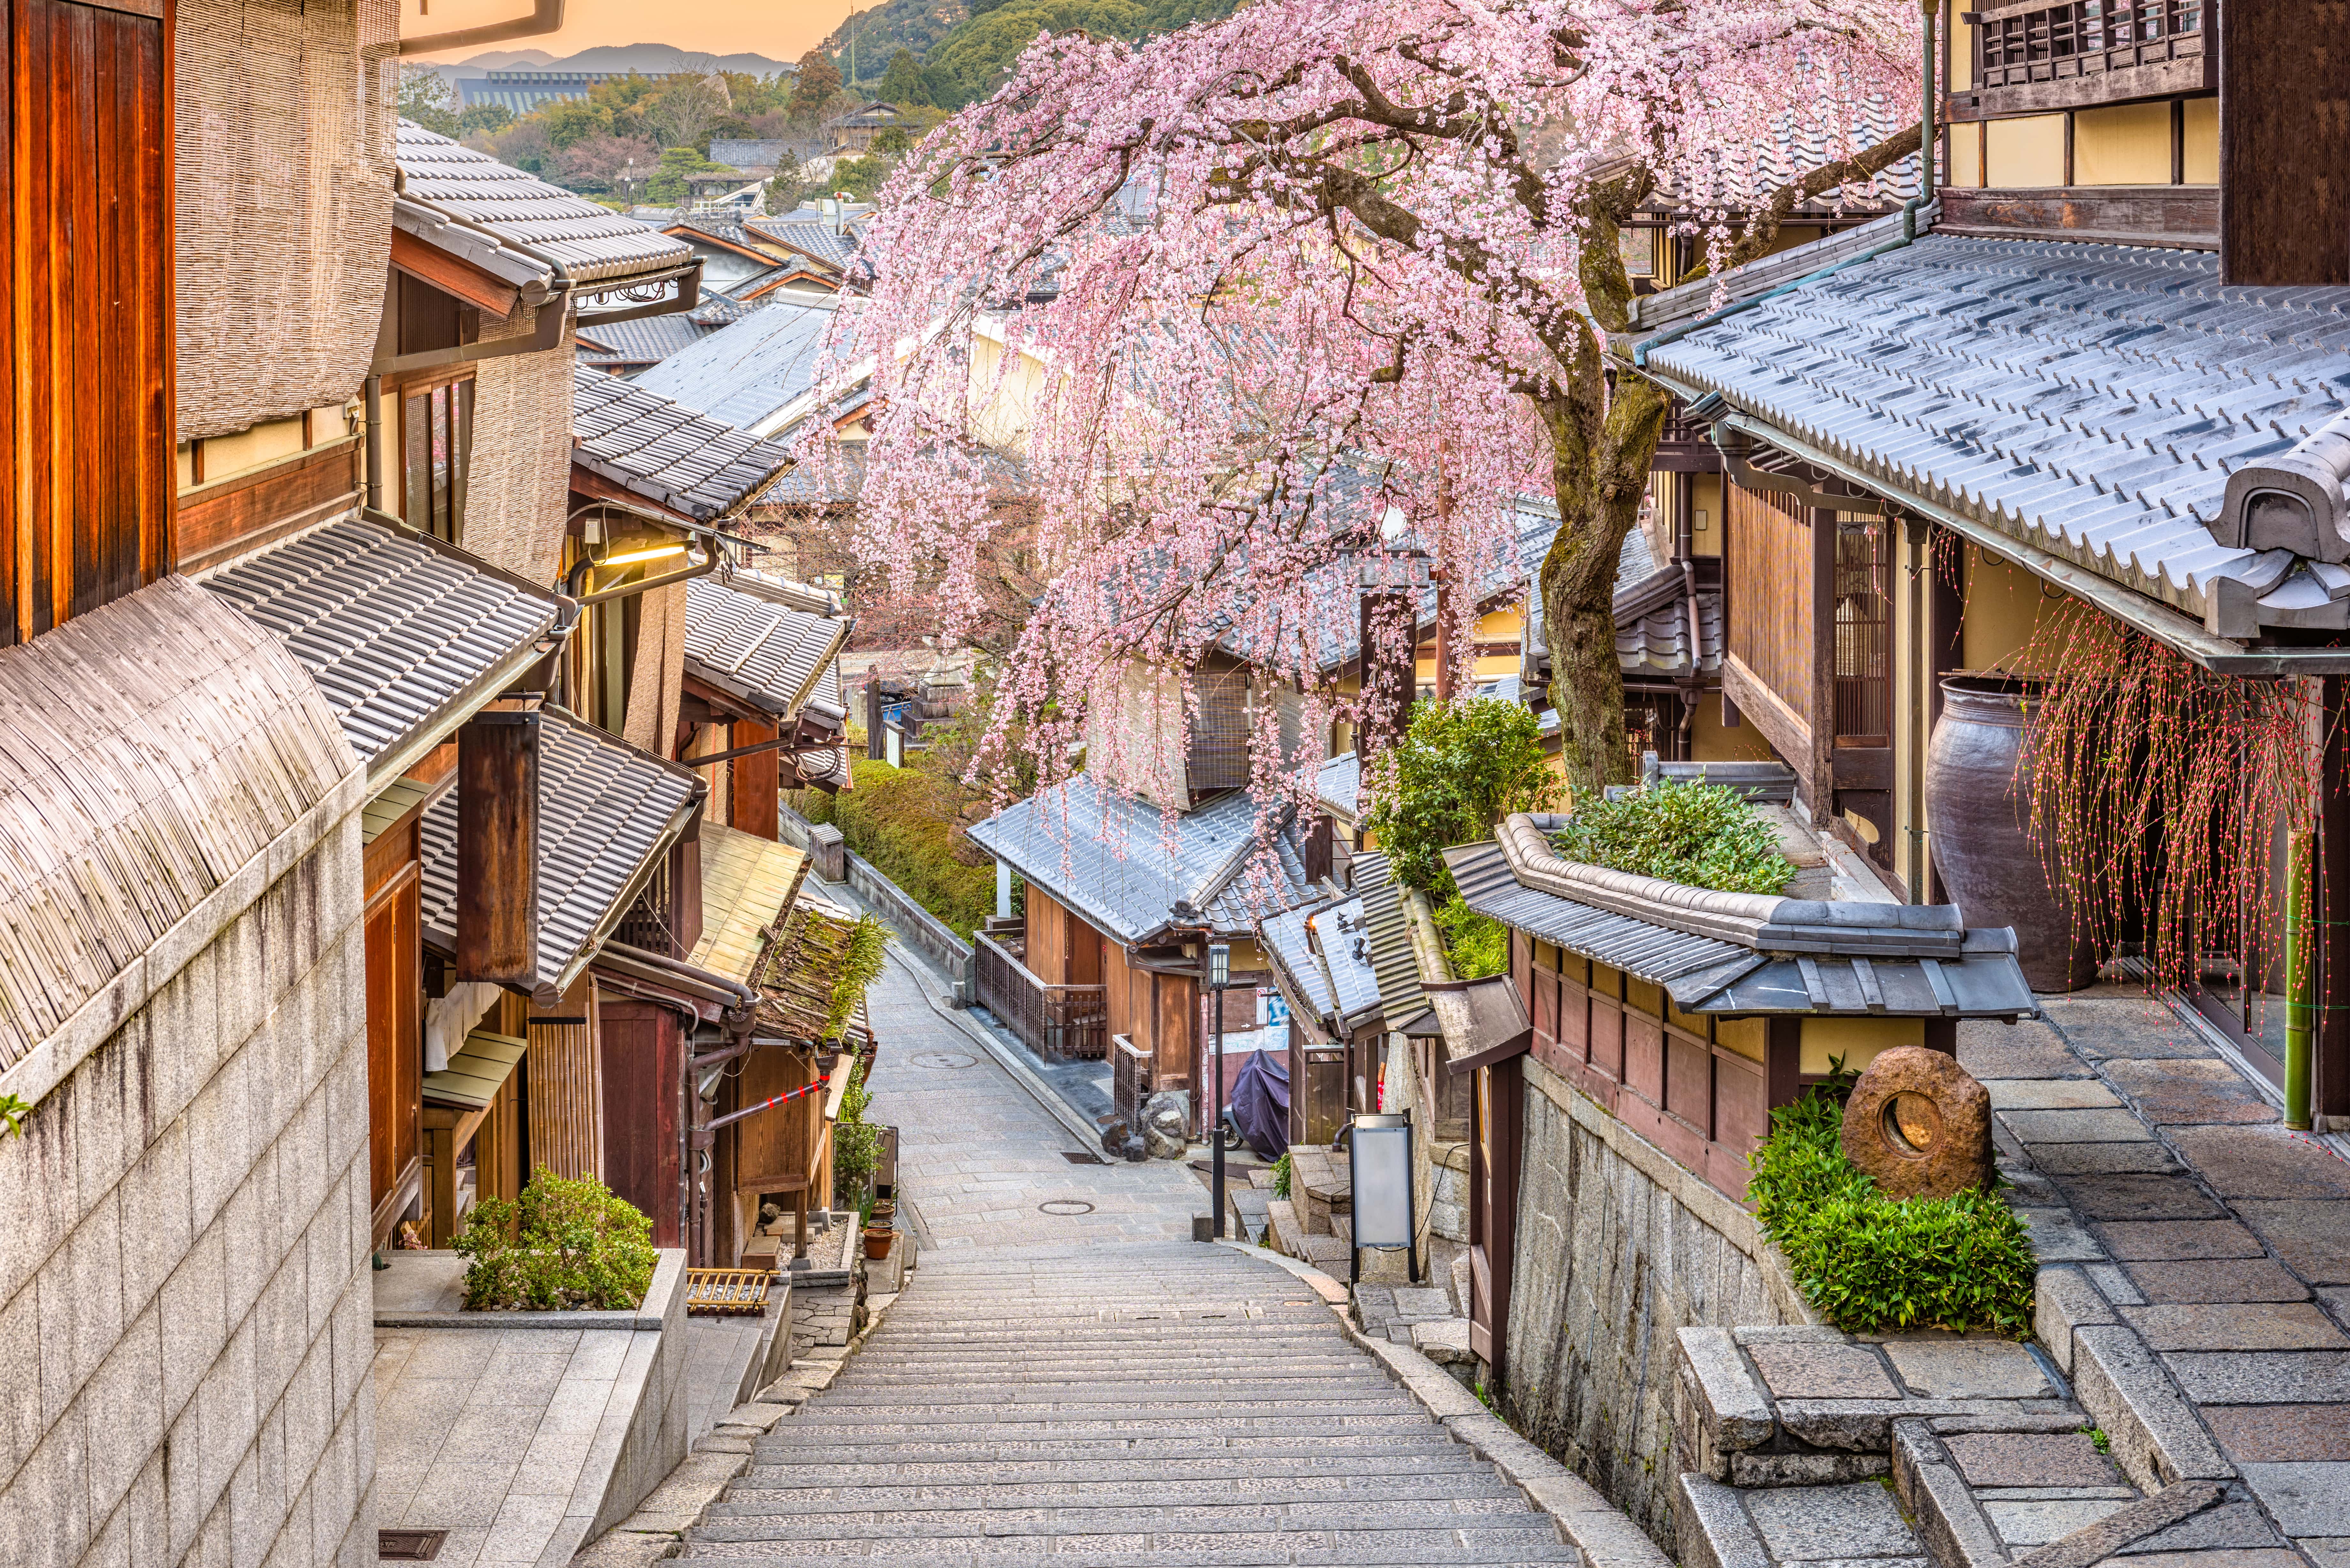 Landscape Cherry Blossom House Building Stairs Village 7360x4912